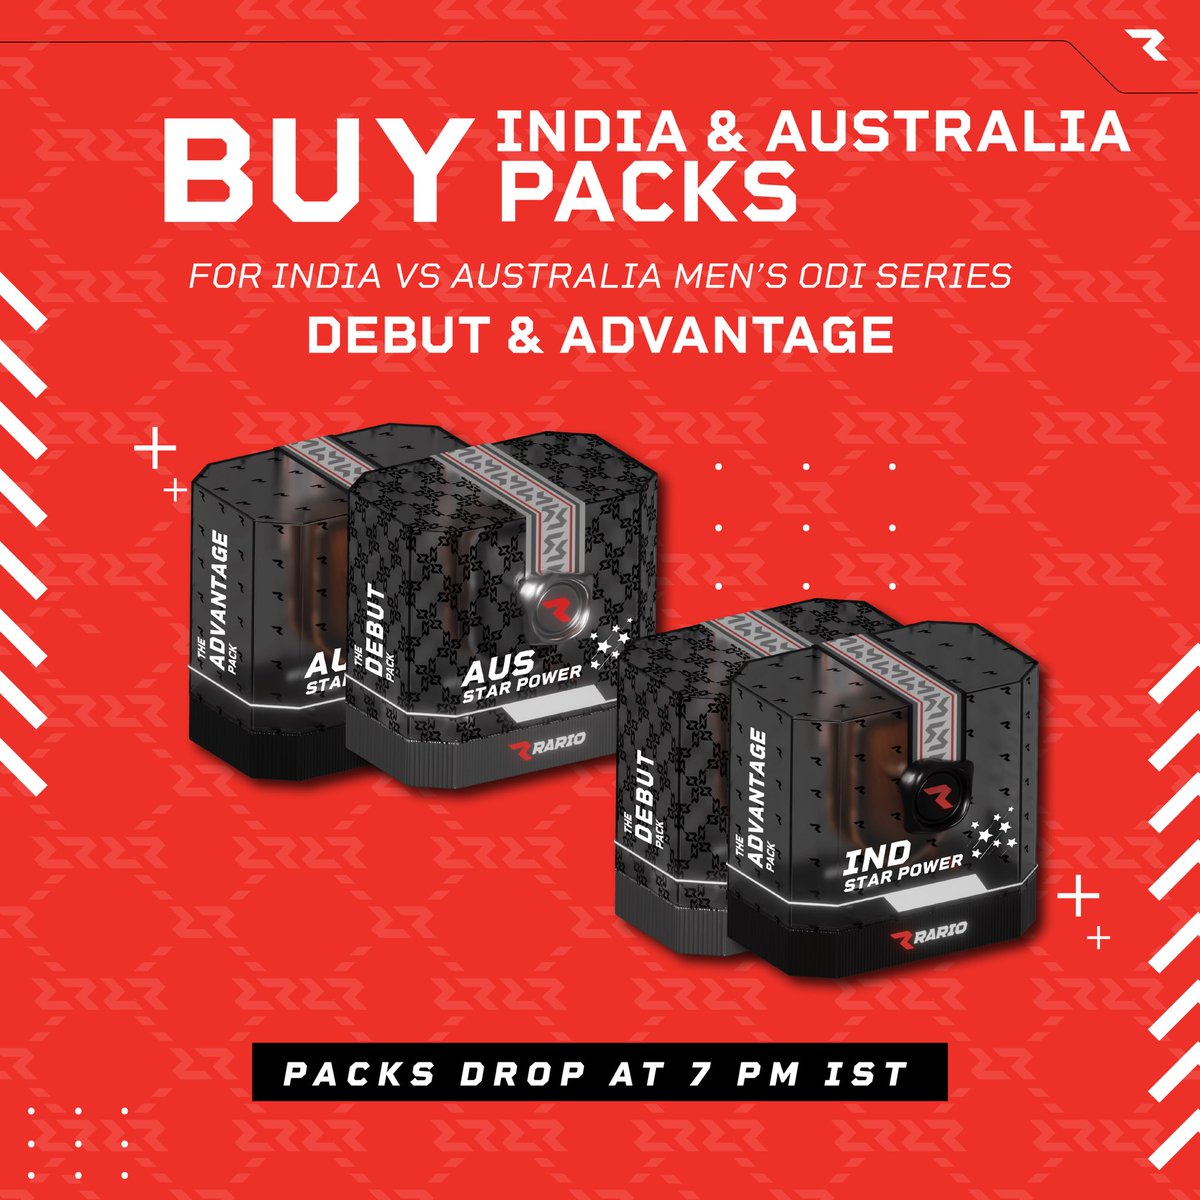 Another ODI series! It's India vs Australia 😍 Create teams with Player Cards of top IND - AUS stars & play D3 to win exciting rewa₹ds! Pro Hint - While the chase would be for the big stars, don't miss out on some dominating players from the lower orders of both teams.